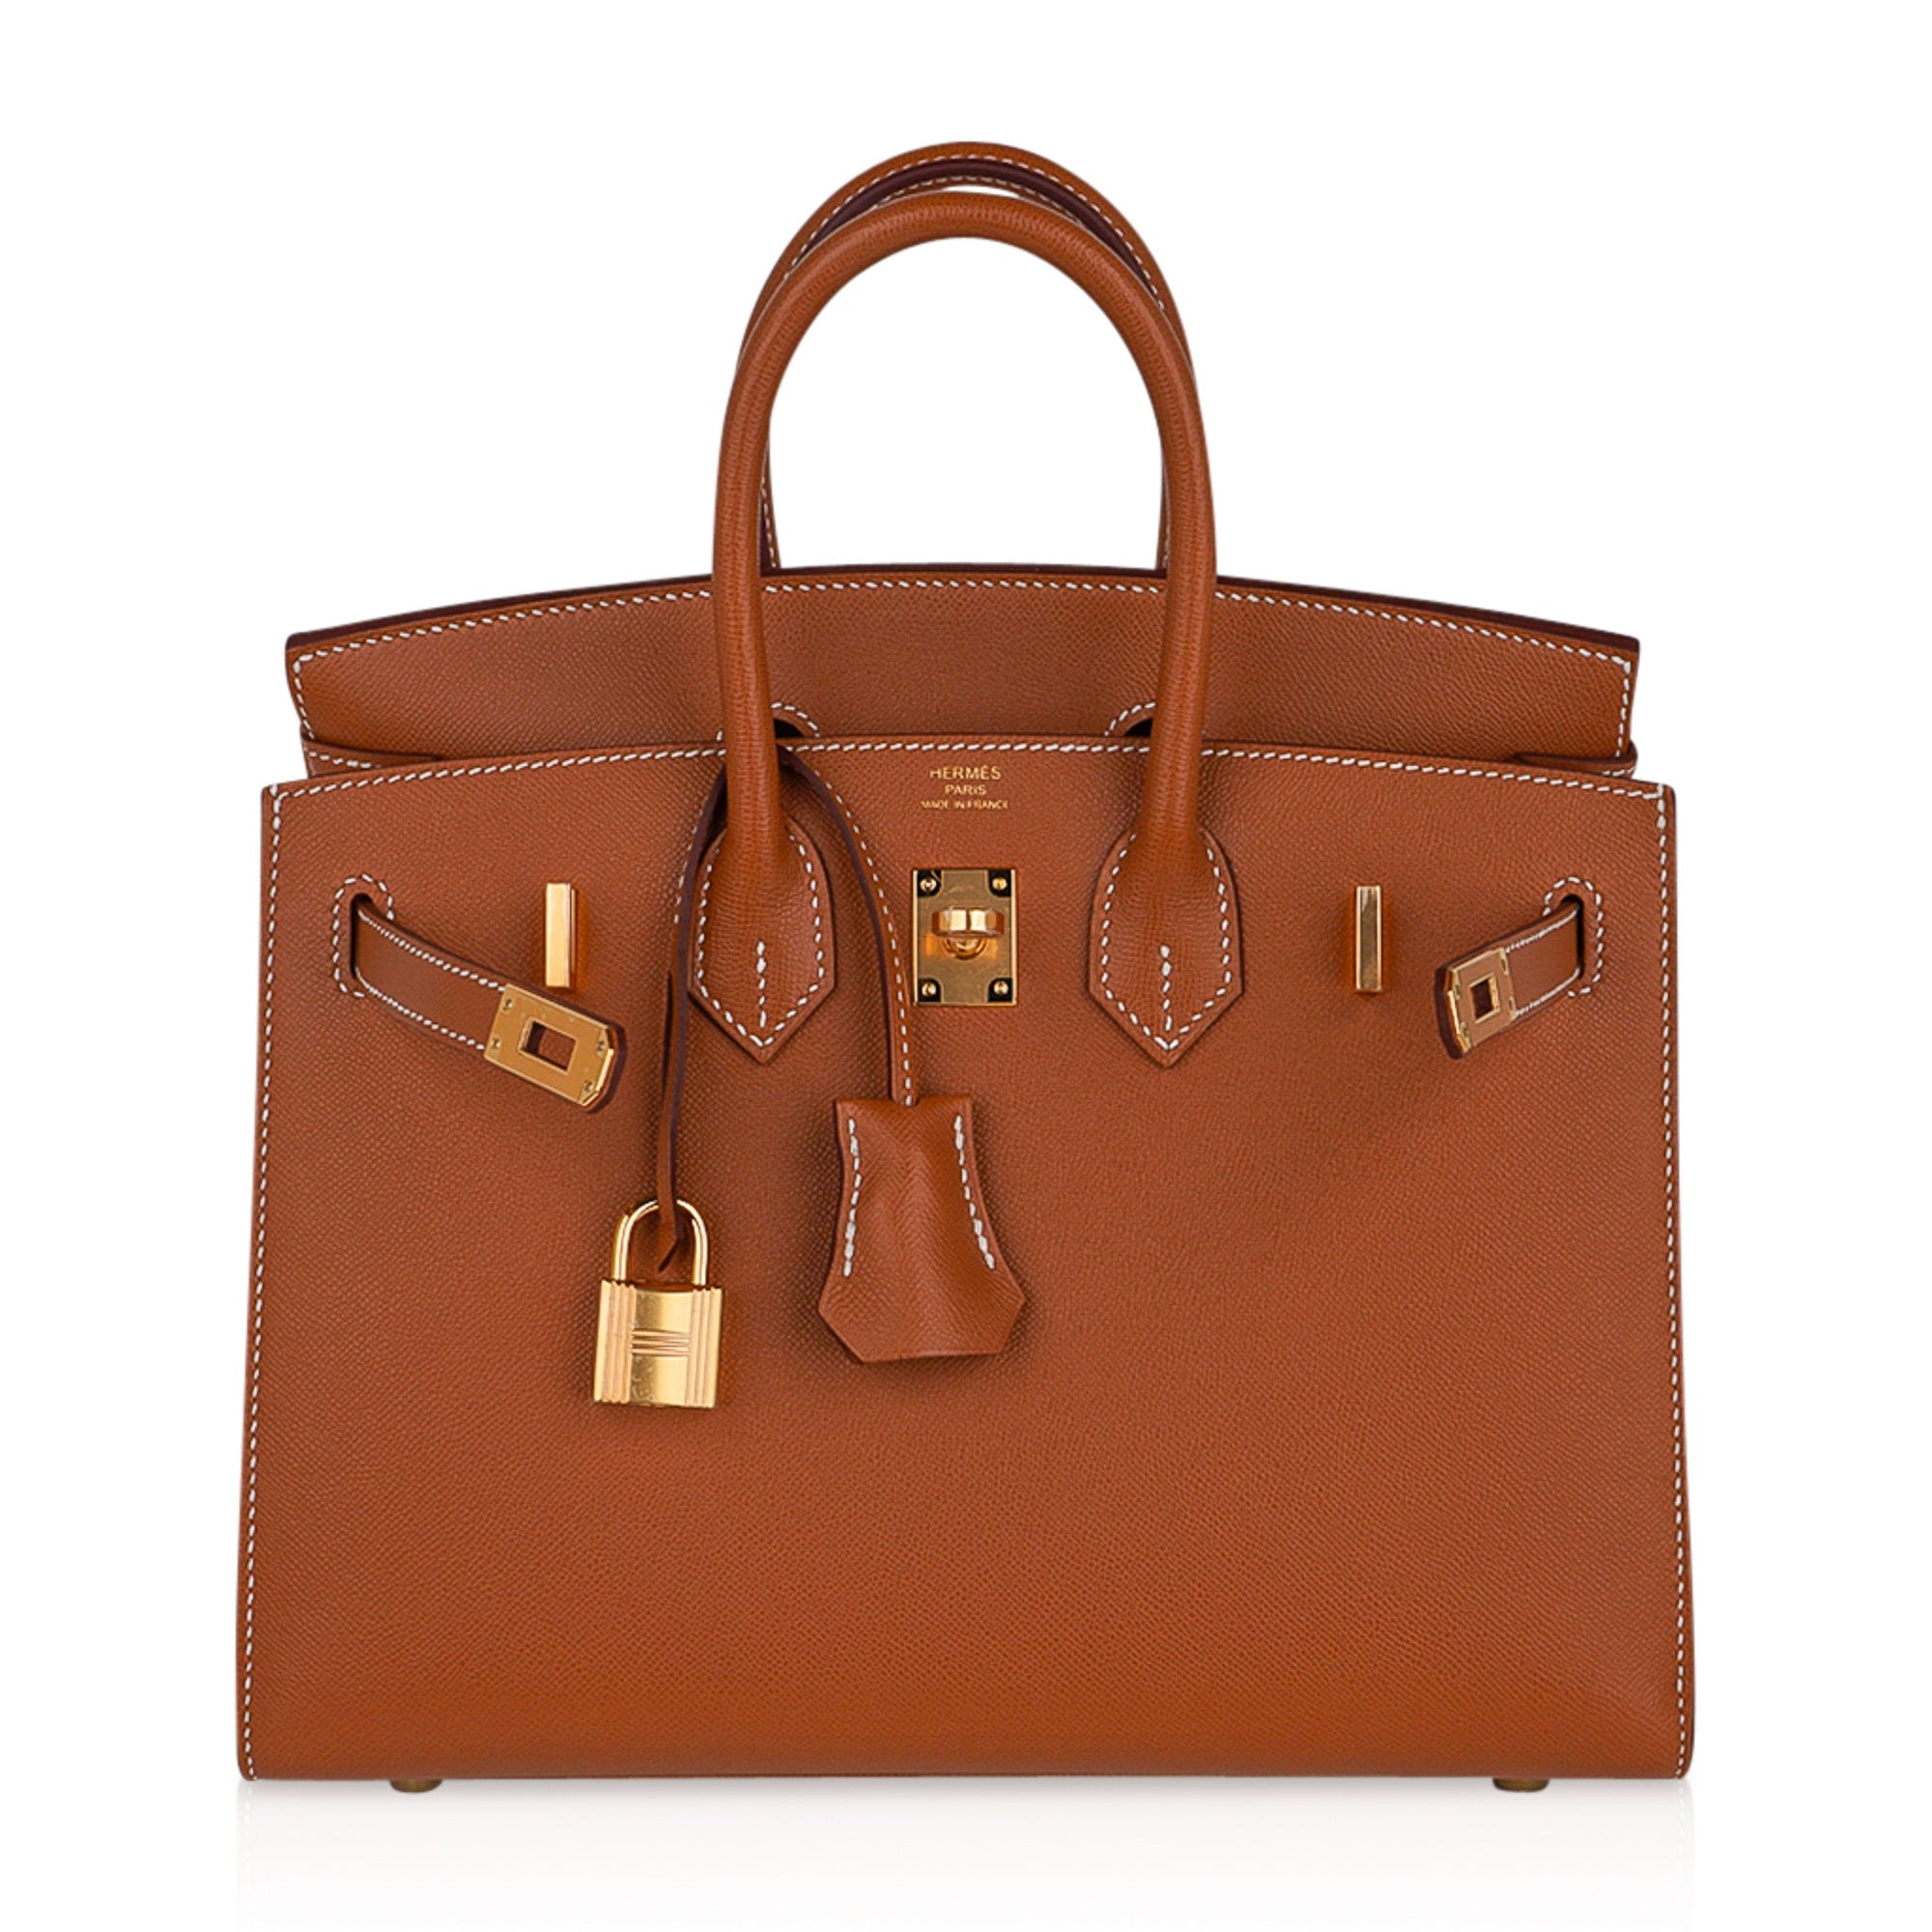 Hermes Birkin 25 Sellier Bag Gold Veau Madame Leather • MIGHTYCHIC